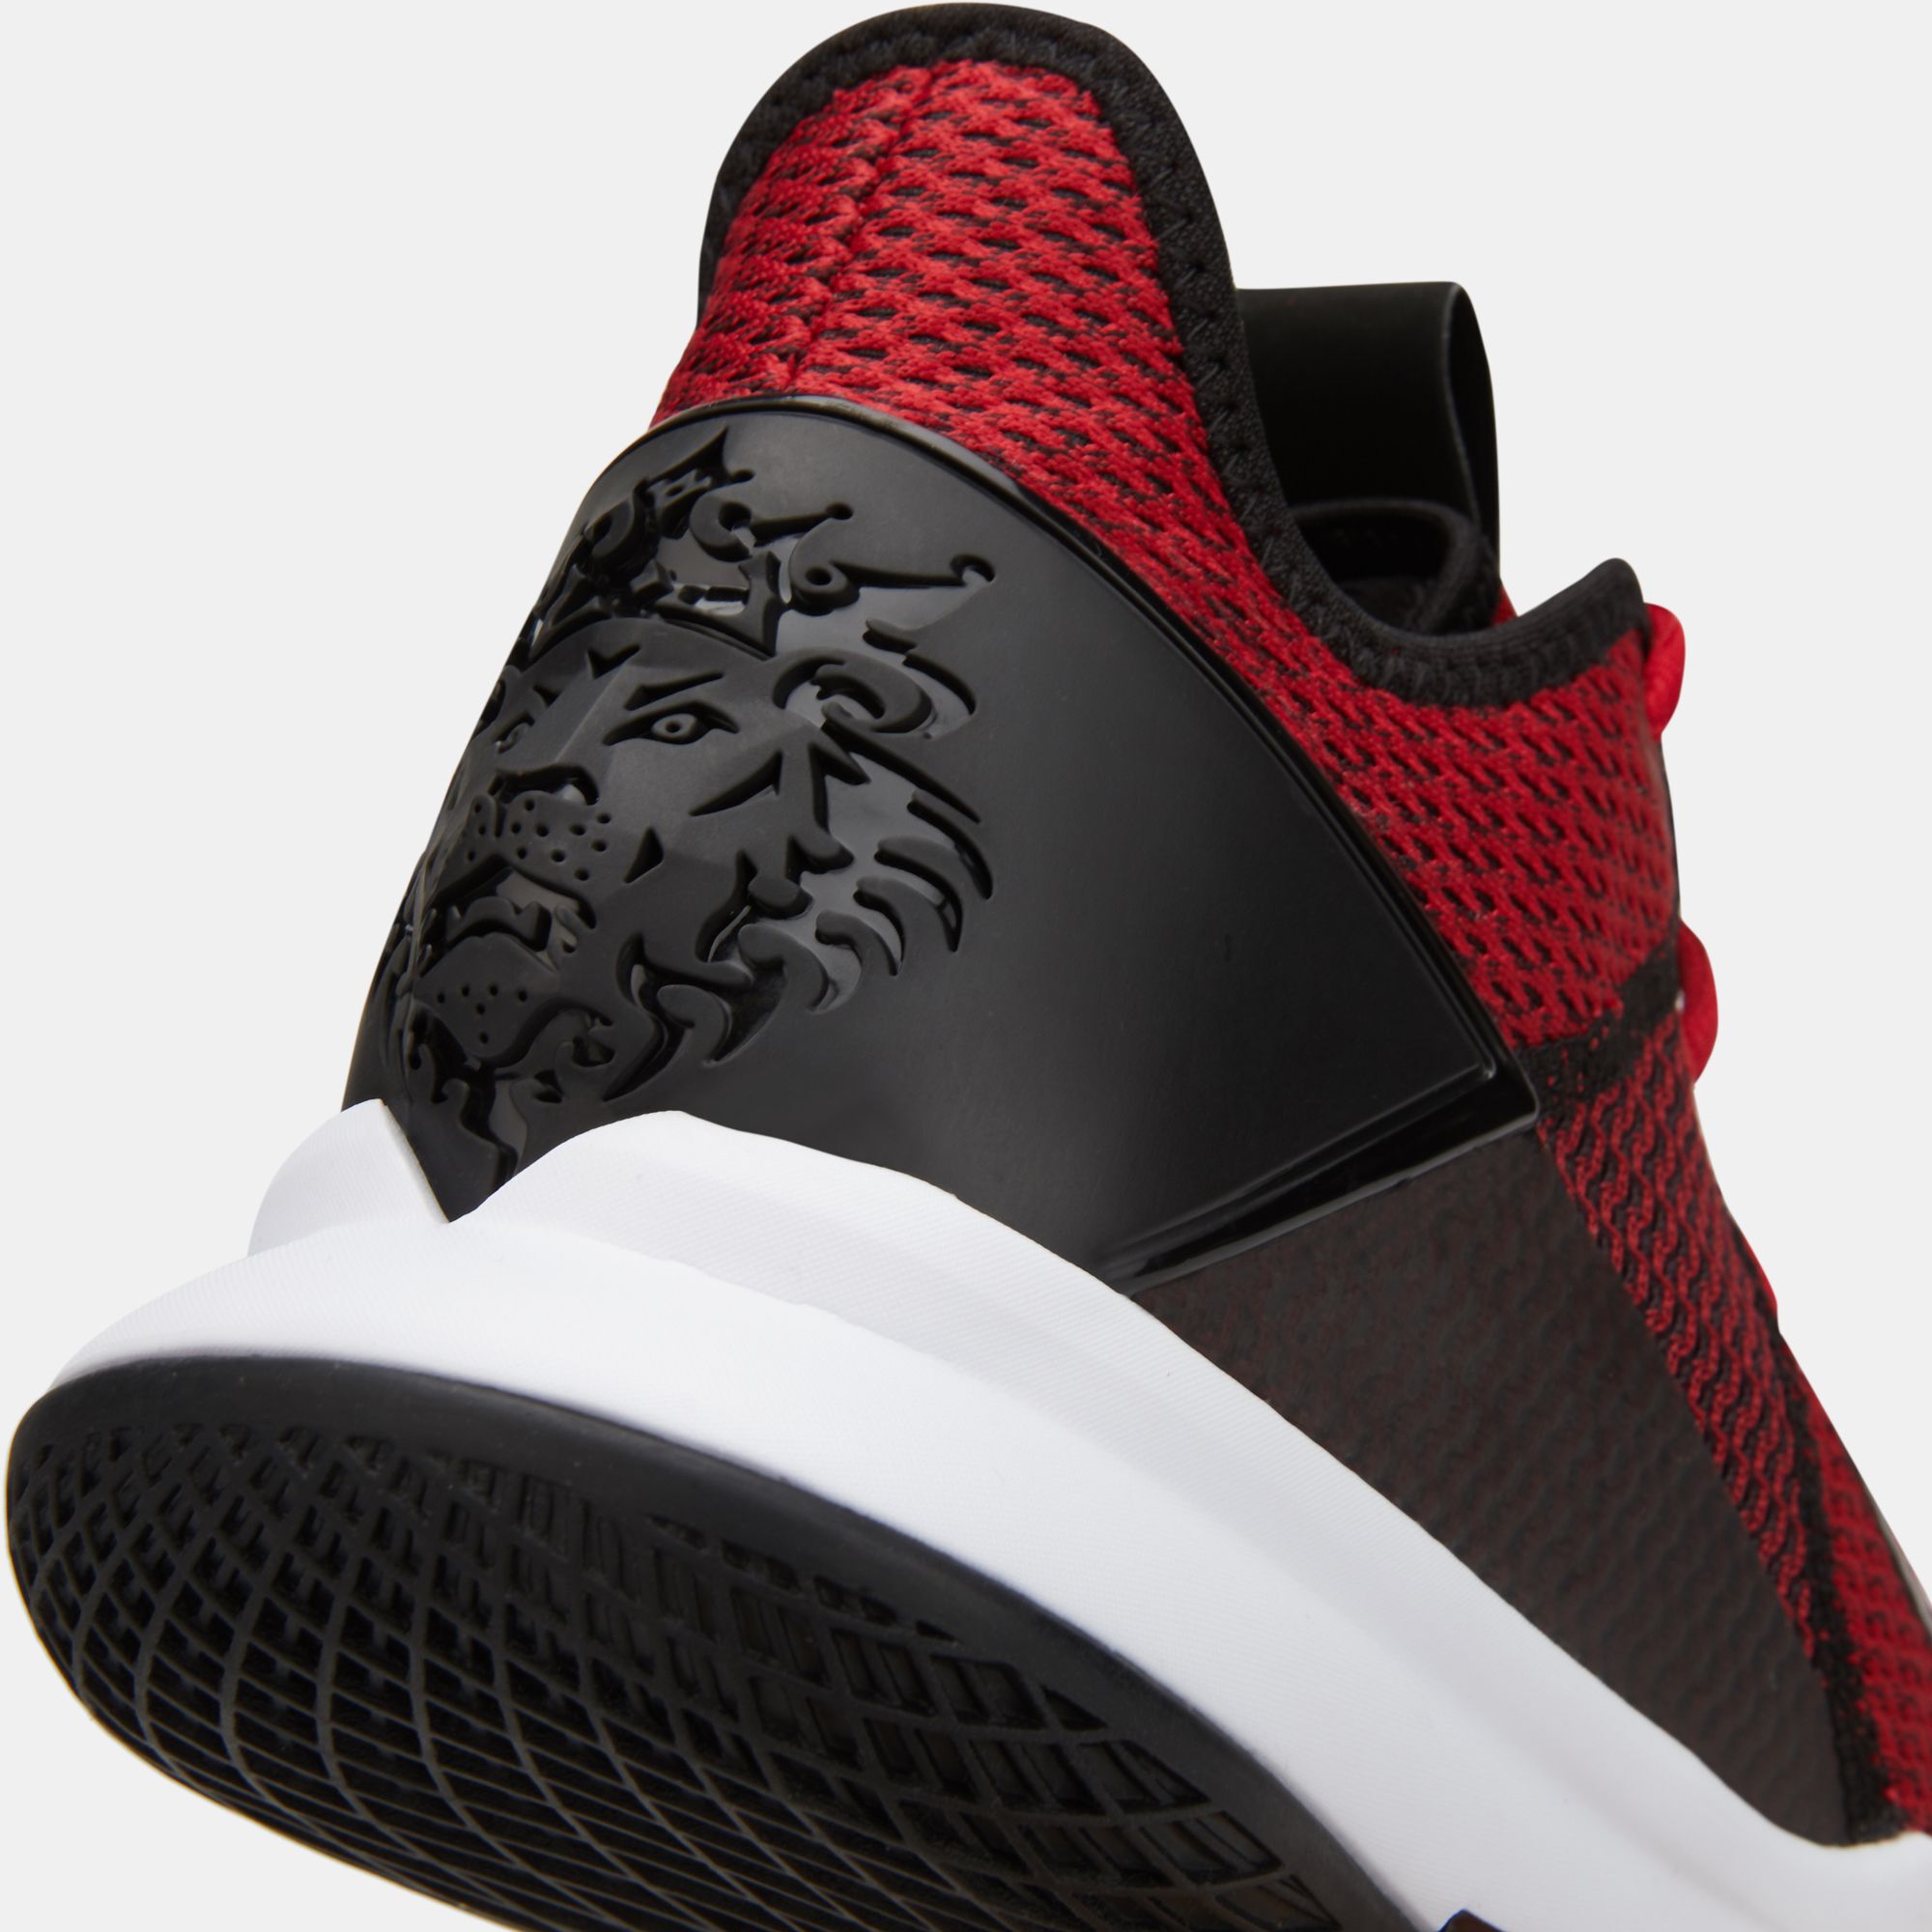 basketball shoes with lion on back